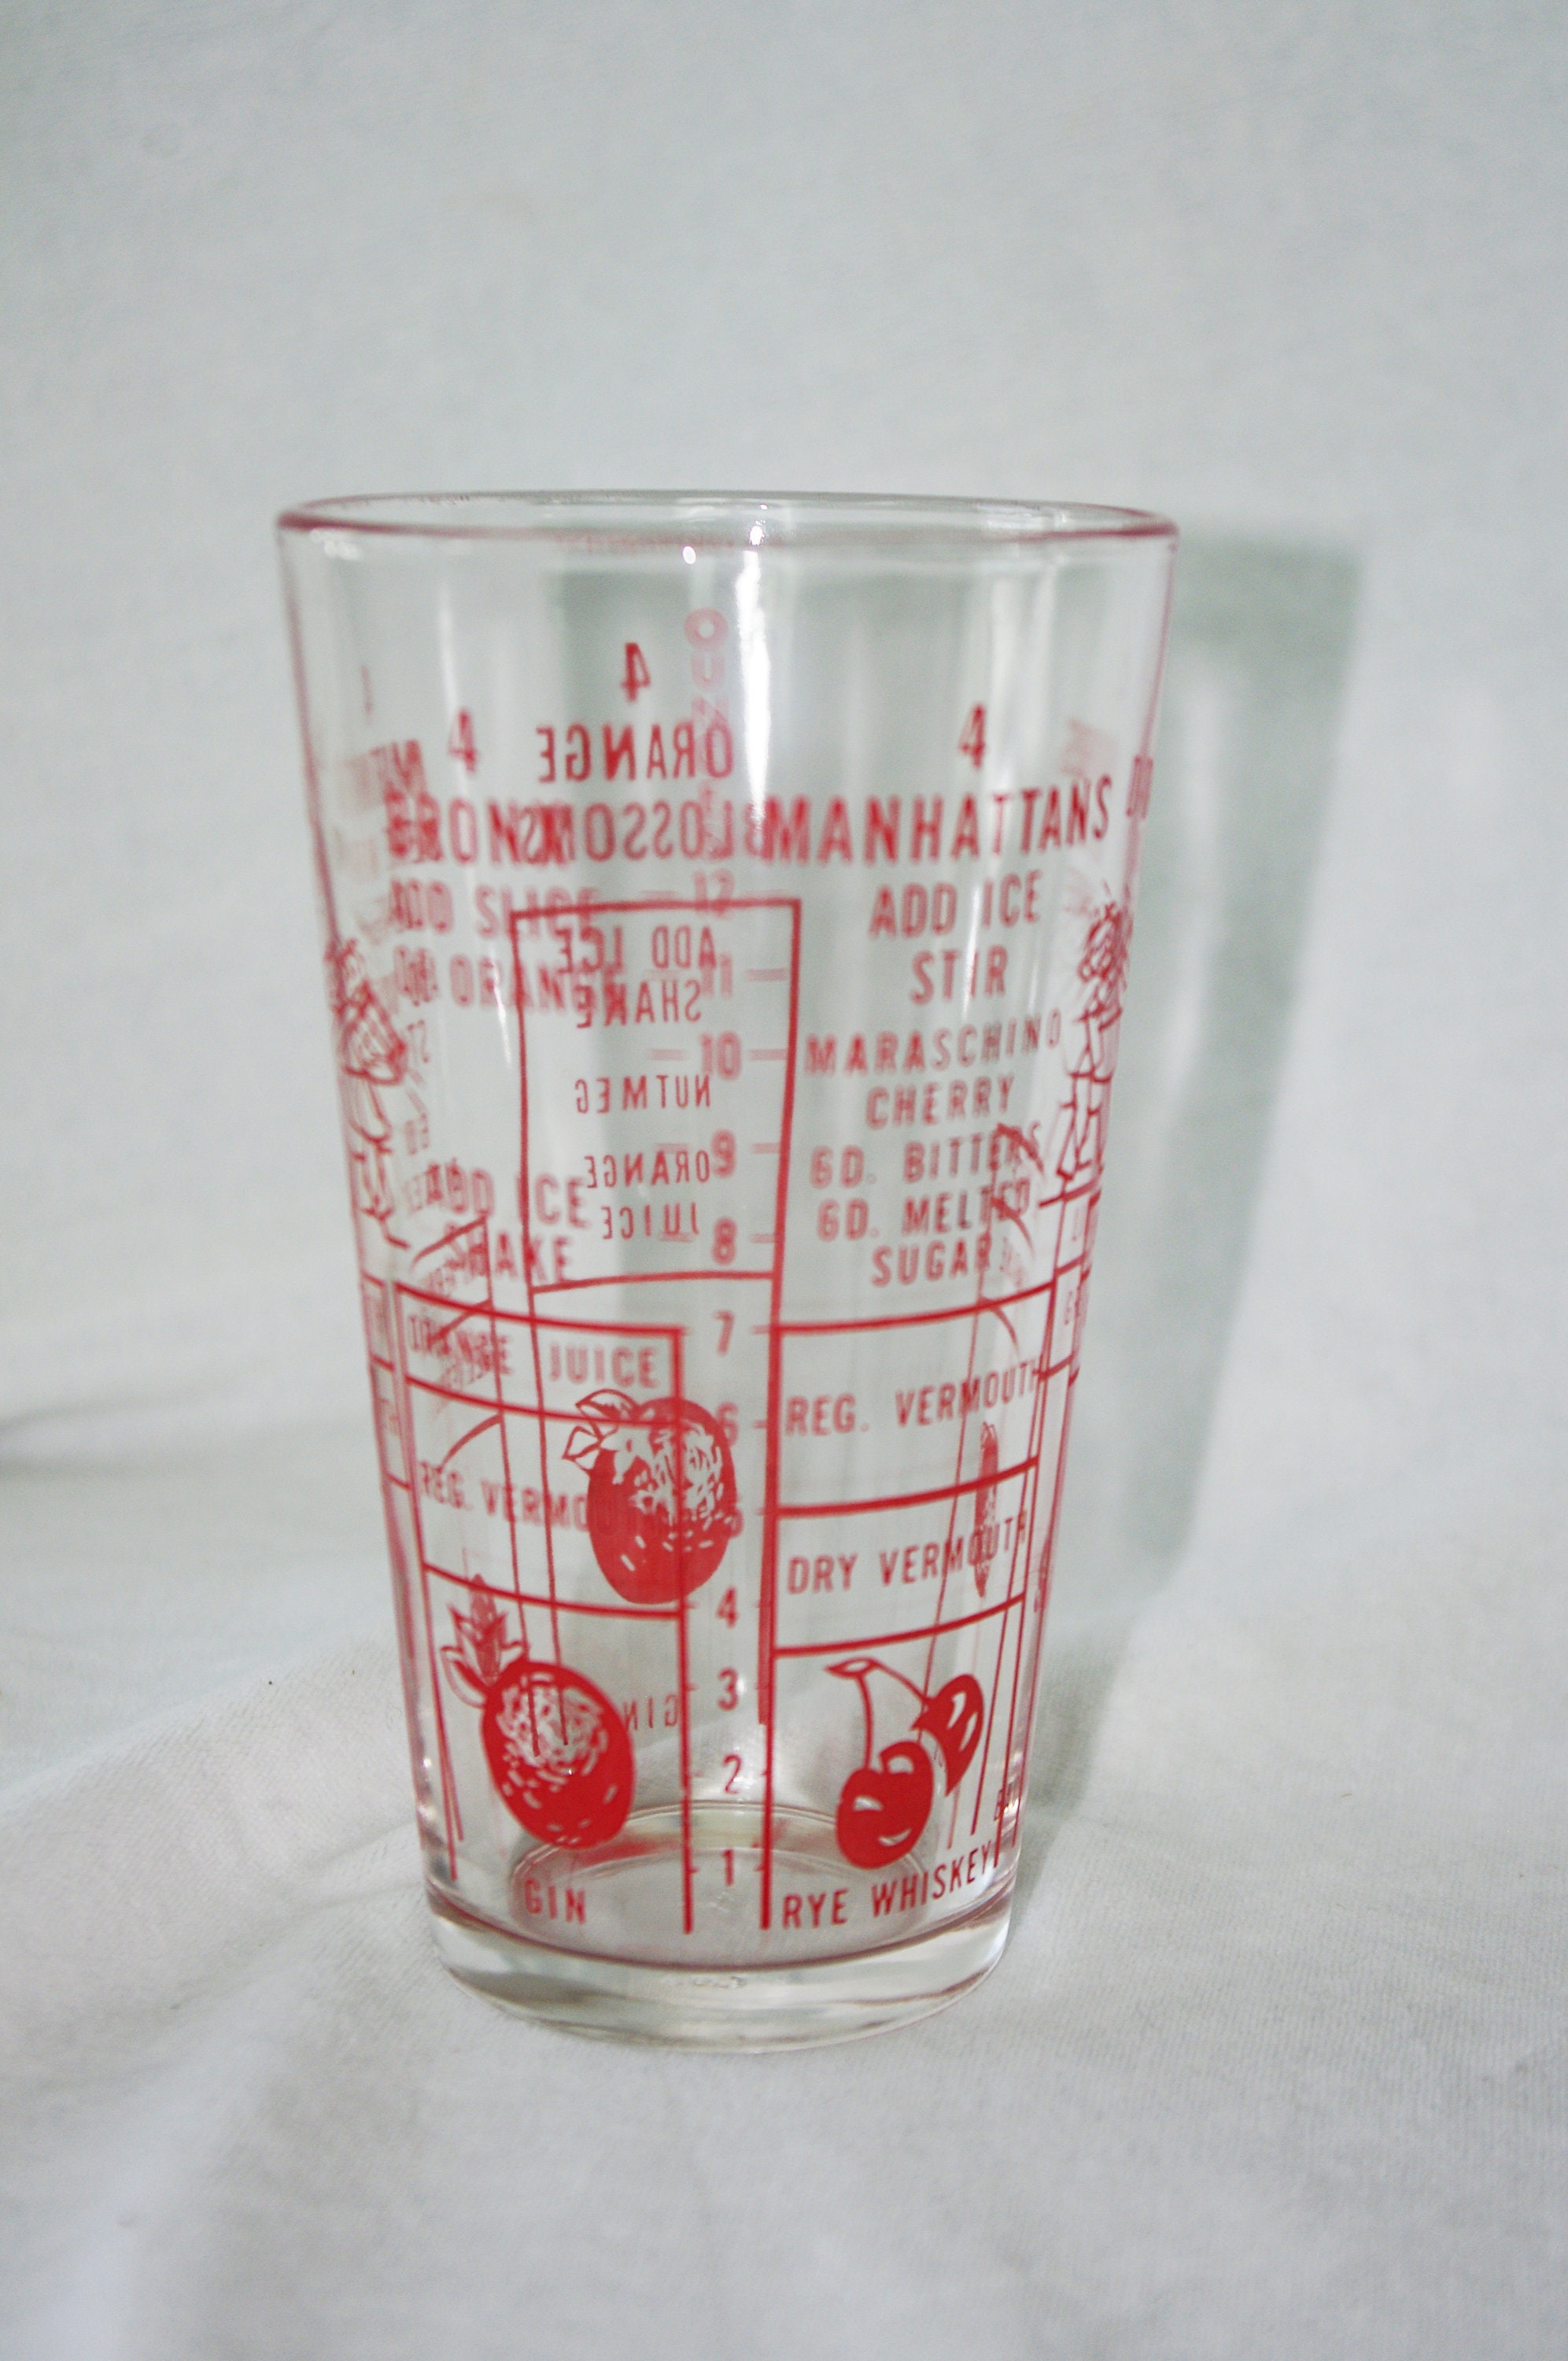 ^VINTAGE CLASSIC COCKTAIL MEASURING glass, MIXED DRINK RECIPE glass  pre-owned